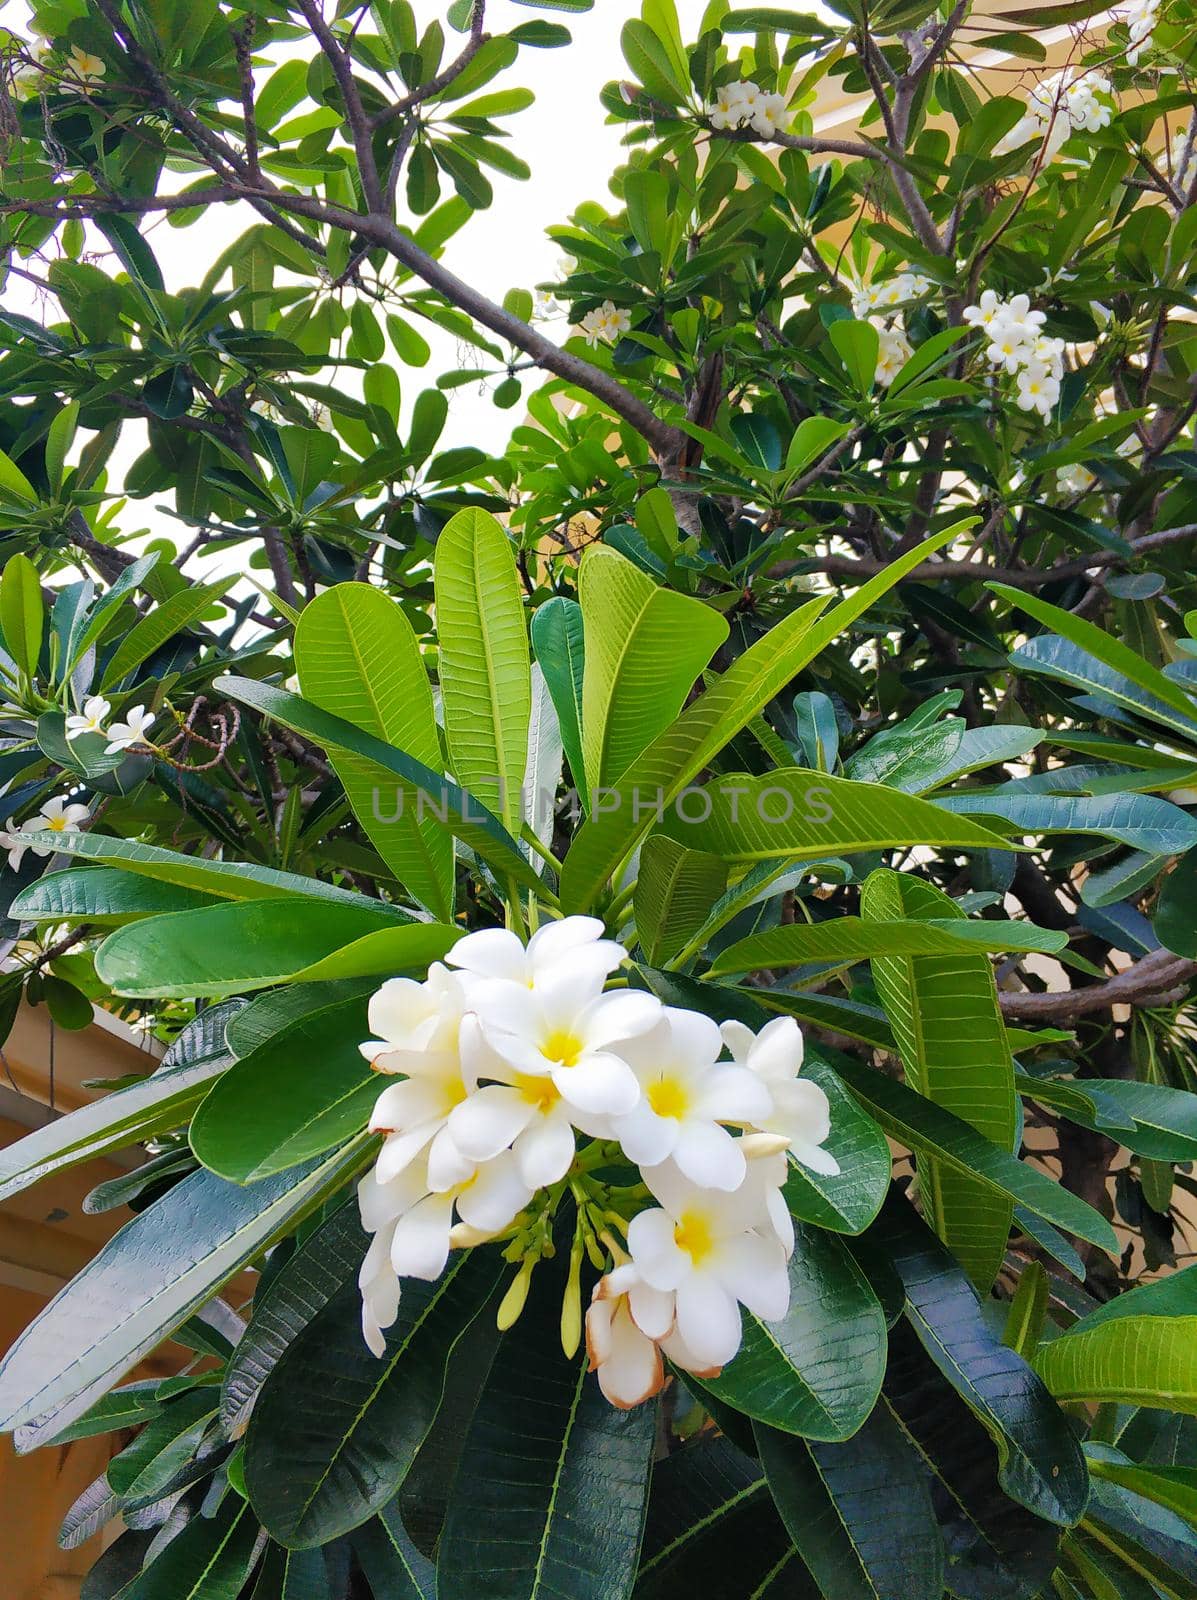 Frangipani tropical flower growing outdoors in thailand by Try_my_best